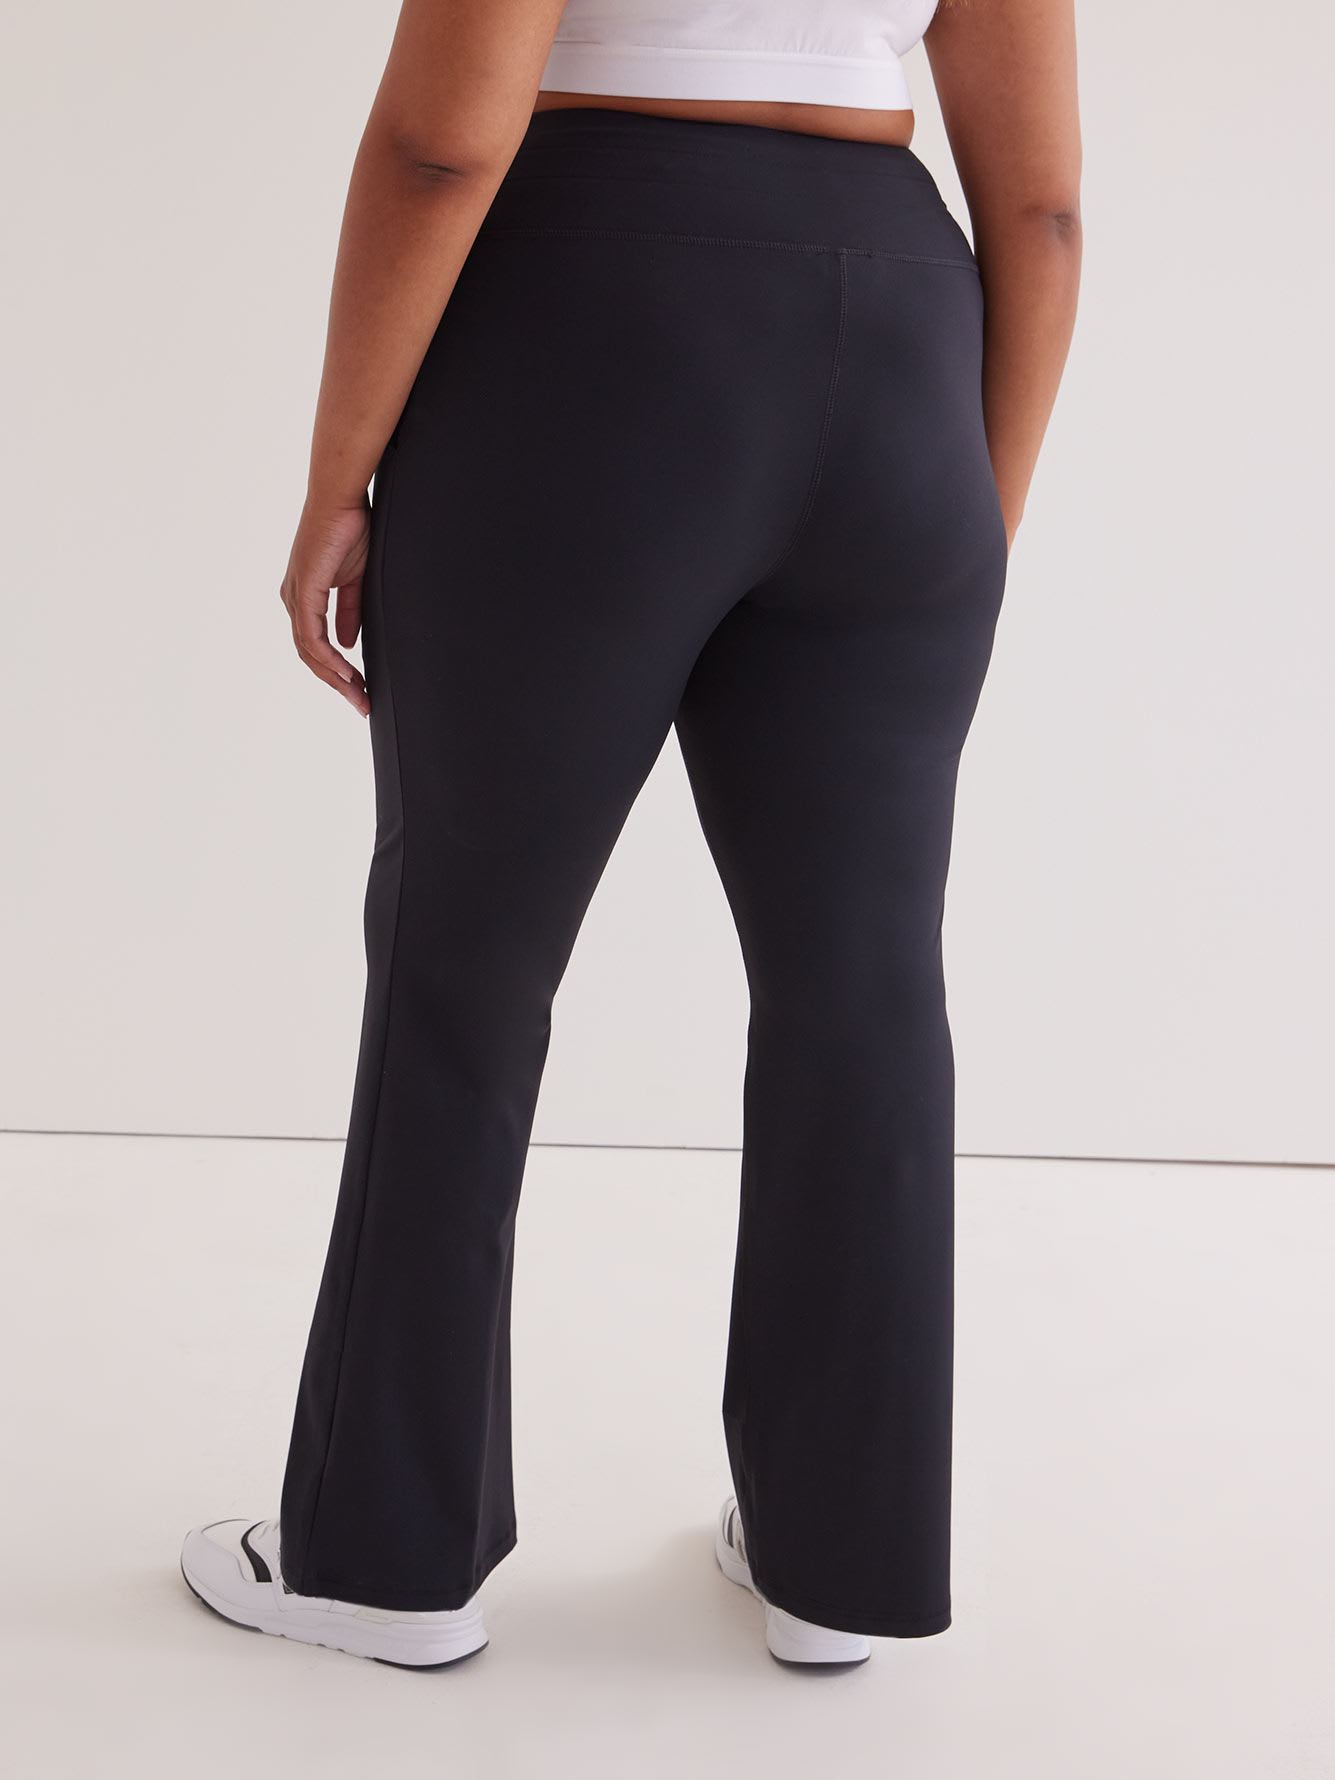 Black Relaxed Yoga Pant - Active Zone